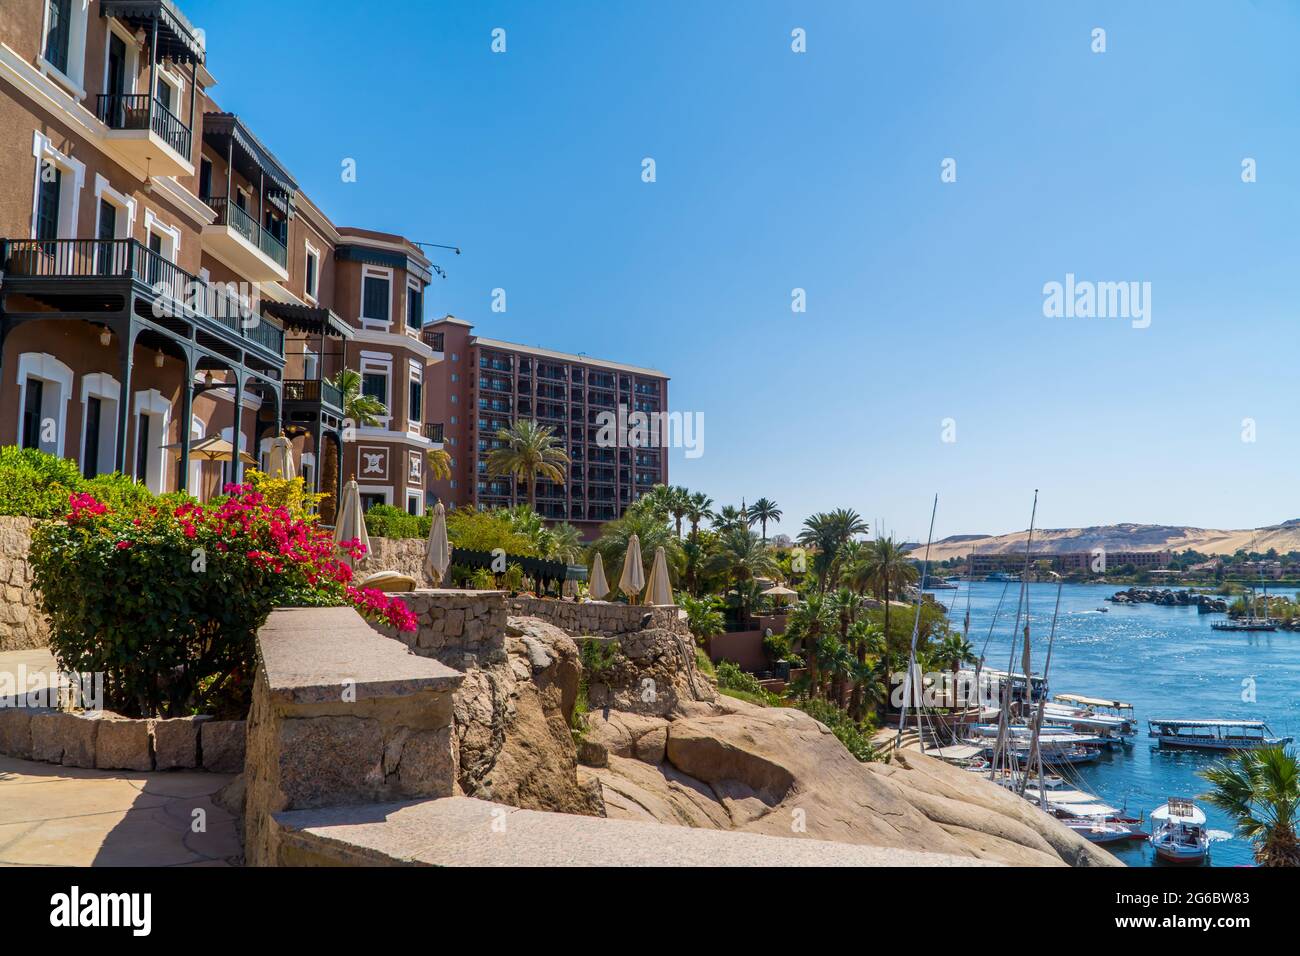 The famous Old Cataract Hotel in Aswan, Egypt Stock Photo